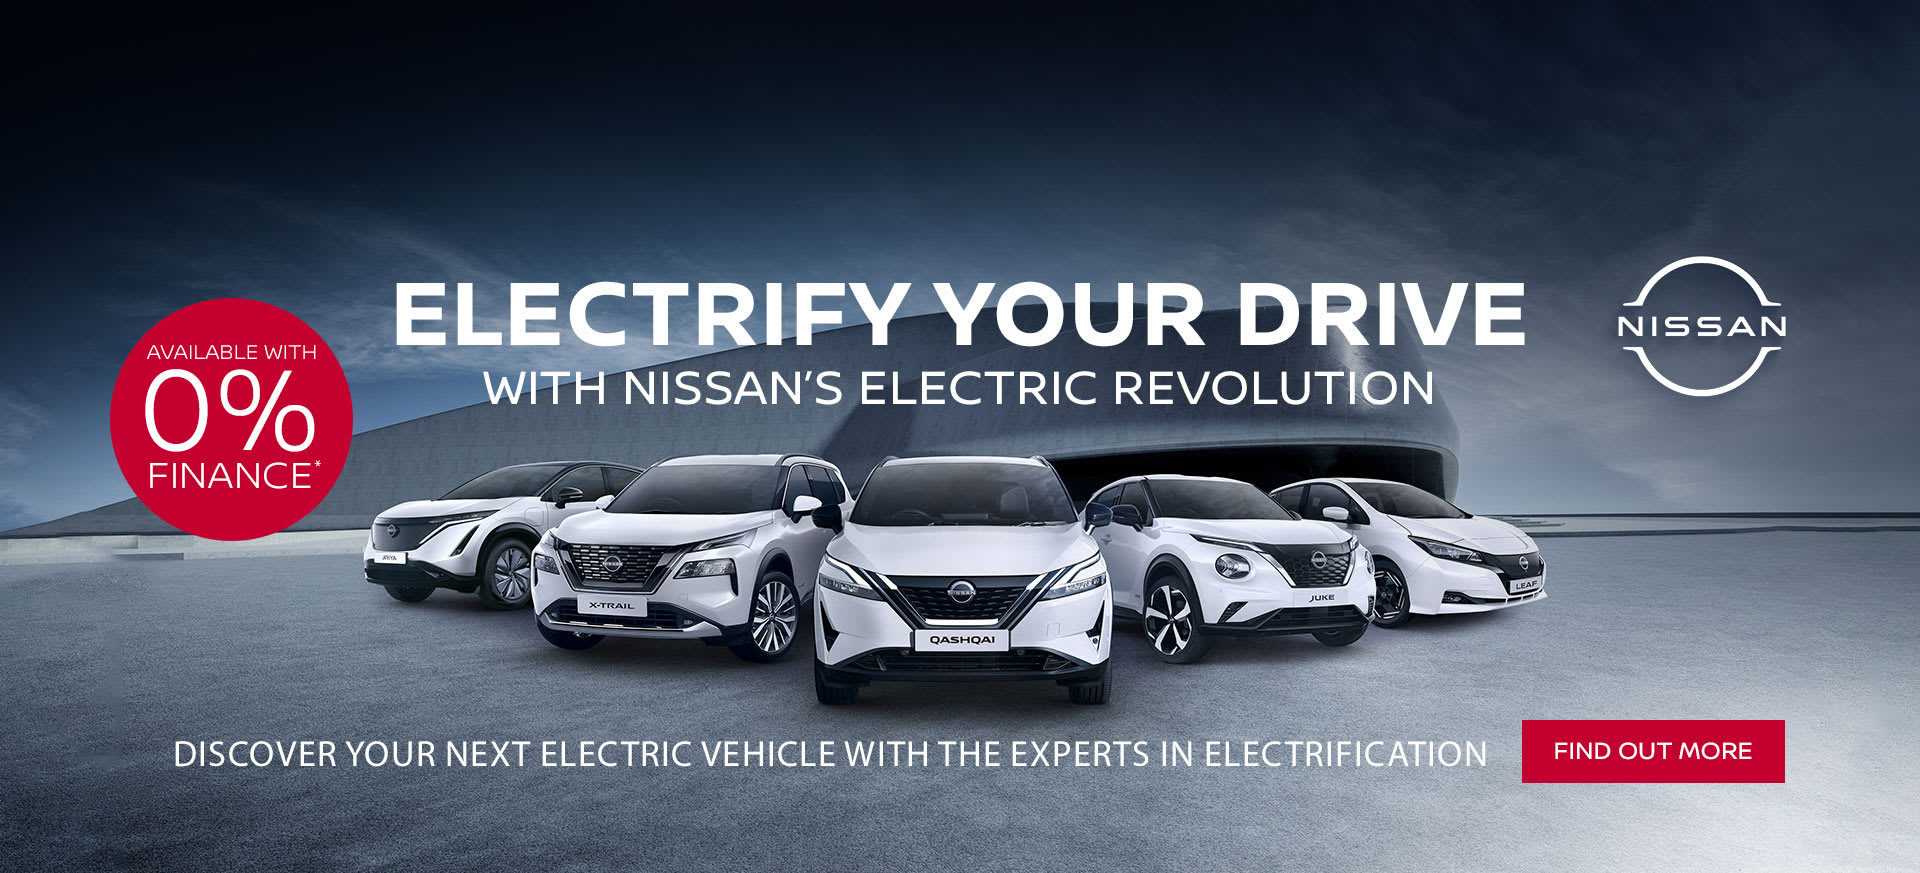 Electrify your drive with Nissan's electric revolution